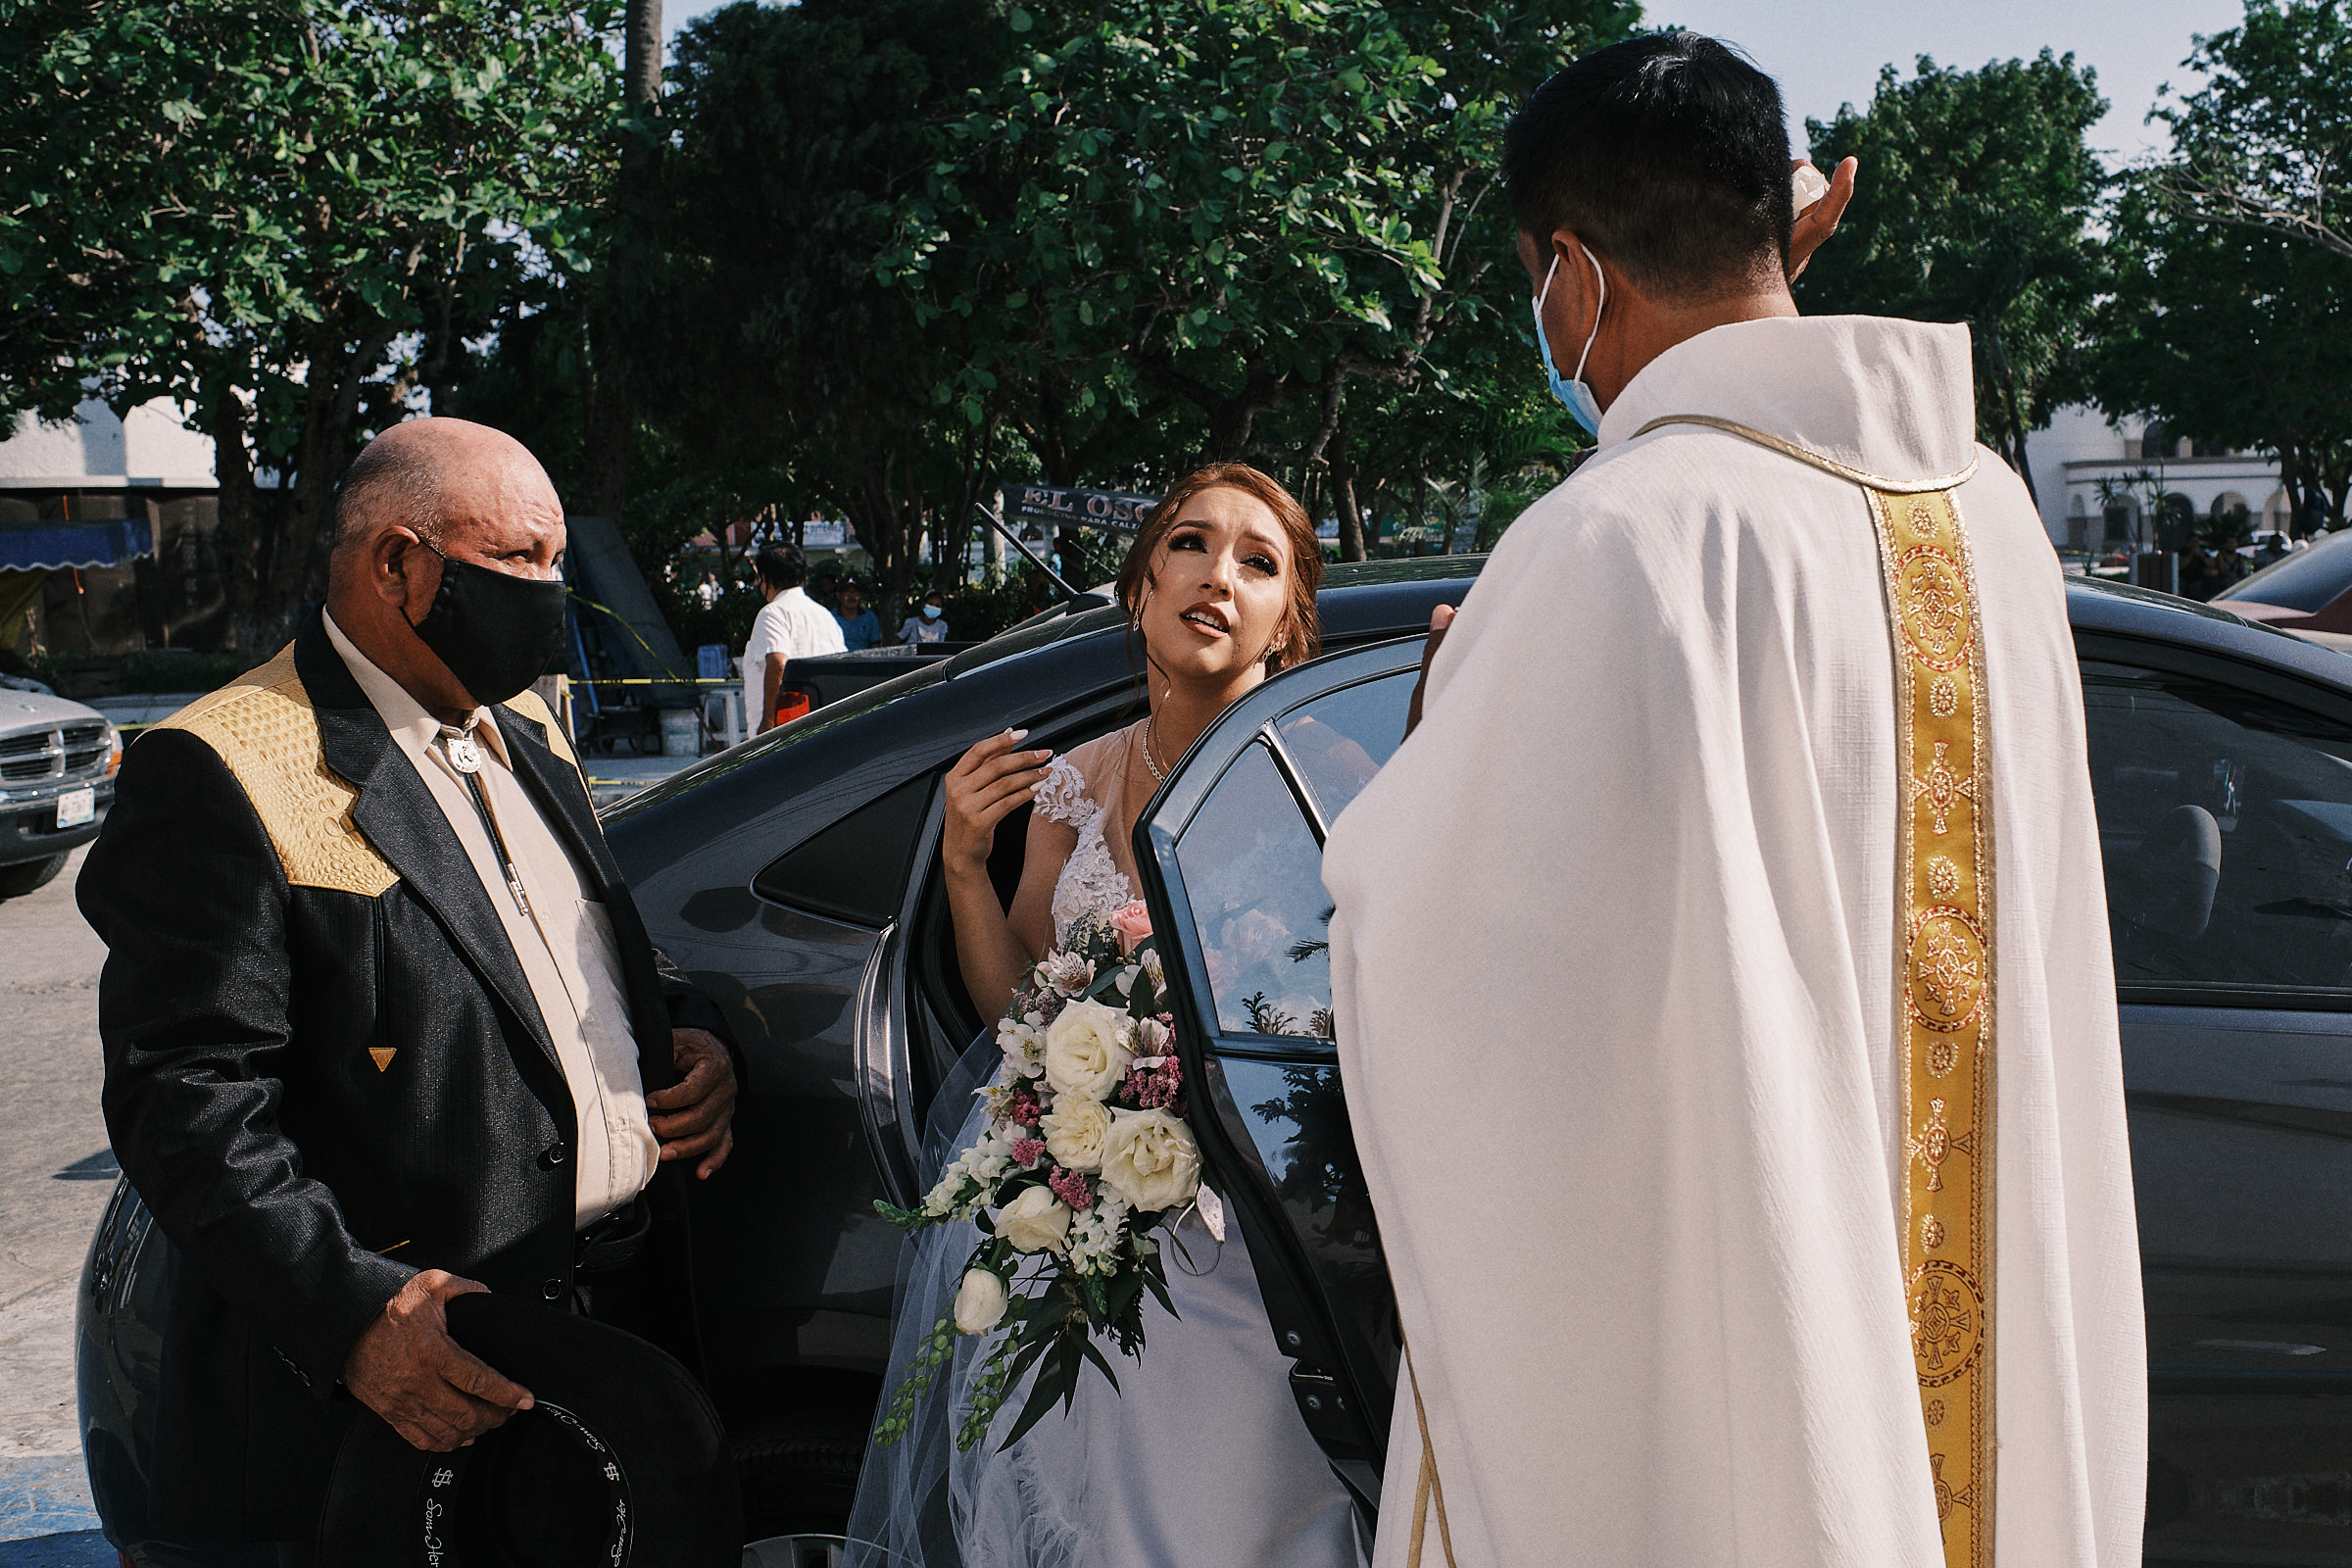 Bride Gets Down Of The Car As The Priest Blesses Her Prior To The Ceremony